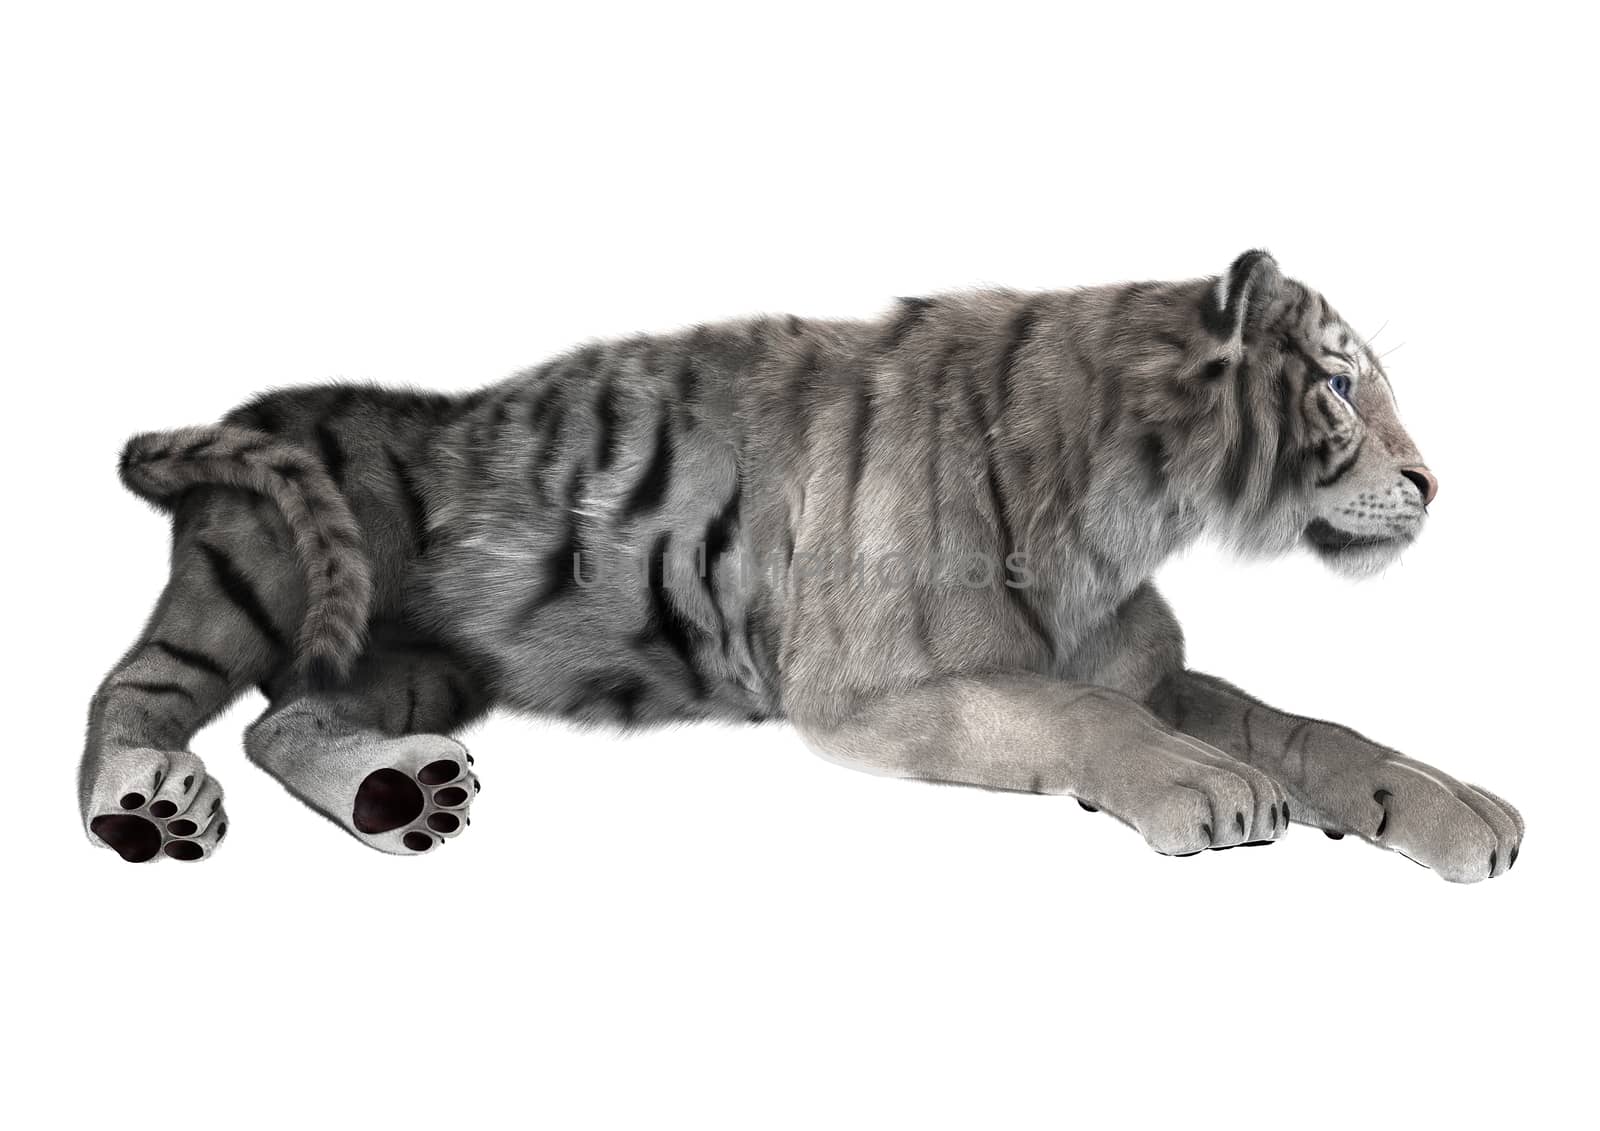 3D digital render of a white tiger resting isolated on white background